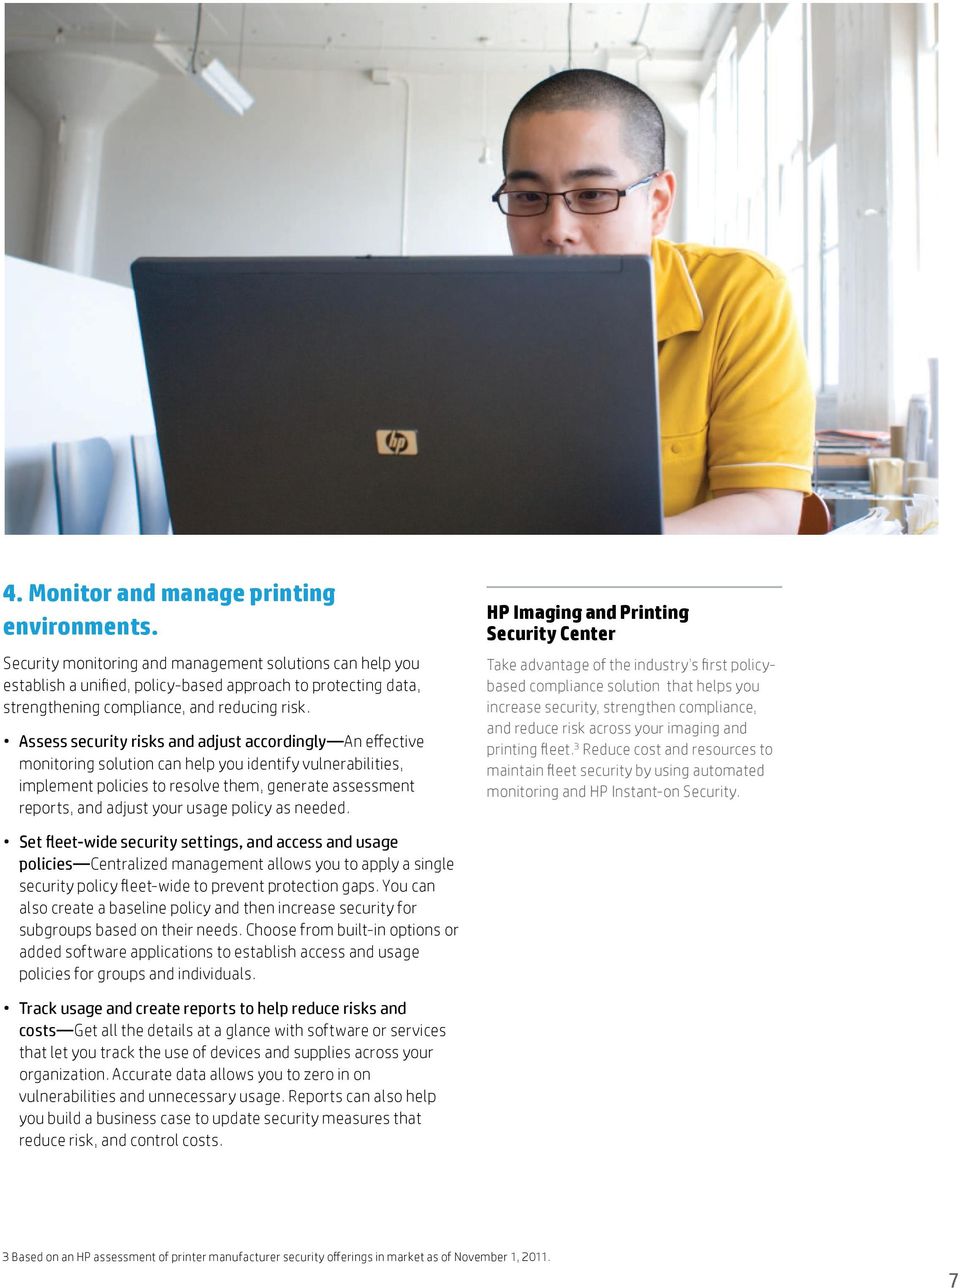 HP Imaging and Printing Security Center based compliance solution that helps you increase security, strengthen compliance, and reduce risk across your imaging and 3 Reduce cost and resources to